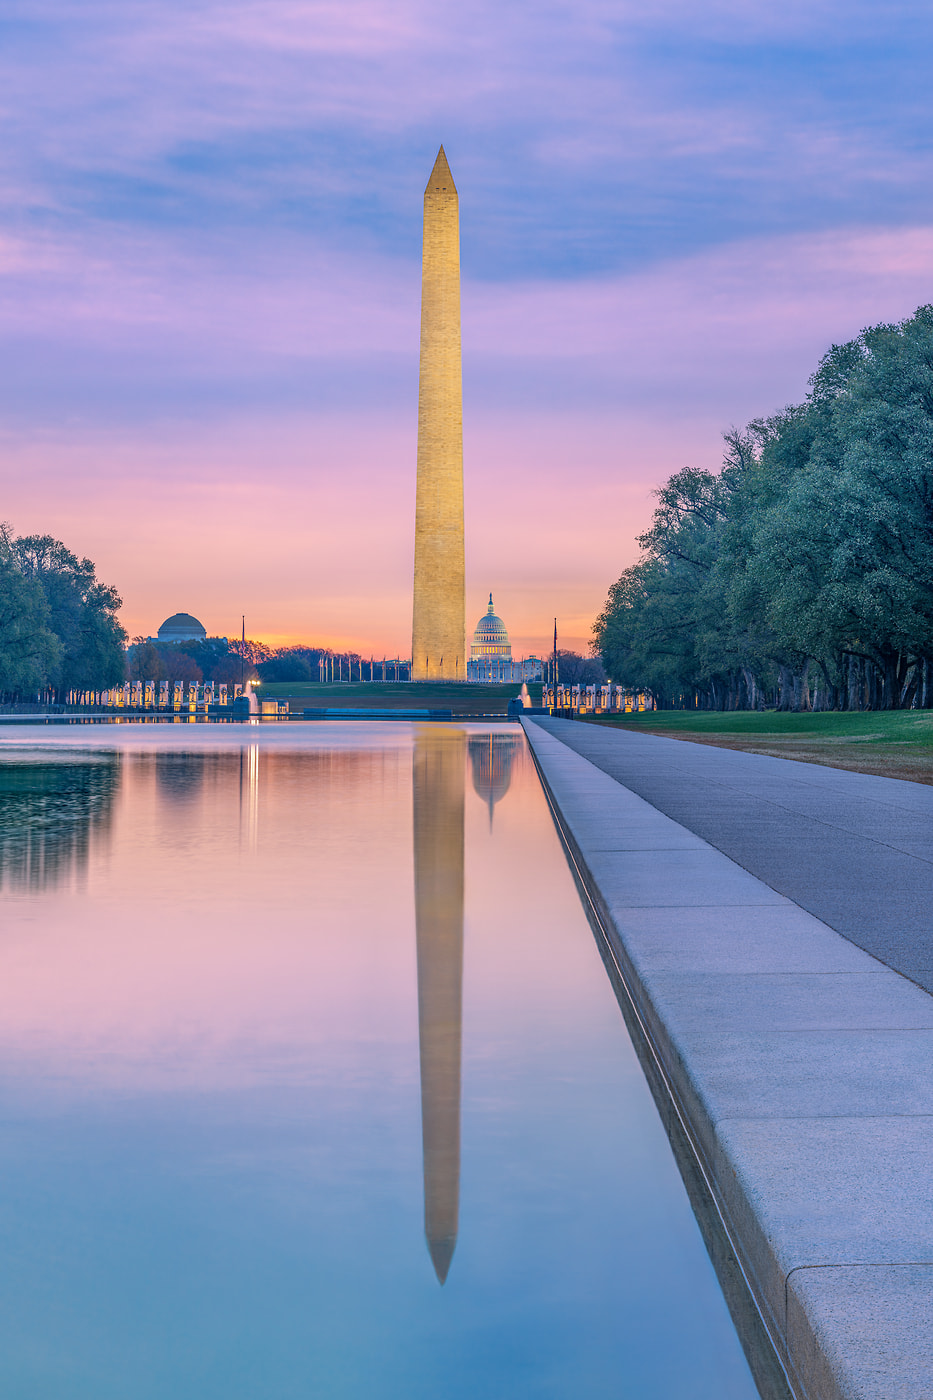 169 megapixels! A very high resolution, large-format VAST photo print of the Washington Monument and the Lincoln Memorial reflecting pool at sunrise; photograph created by Tim Lo Monaco in Lincoln Memorial Reflecting Pool, National Mall, Washington, D.C.